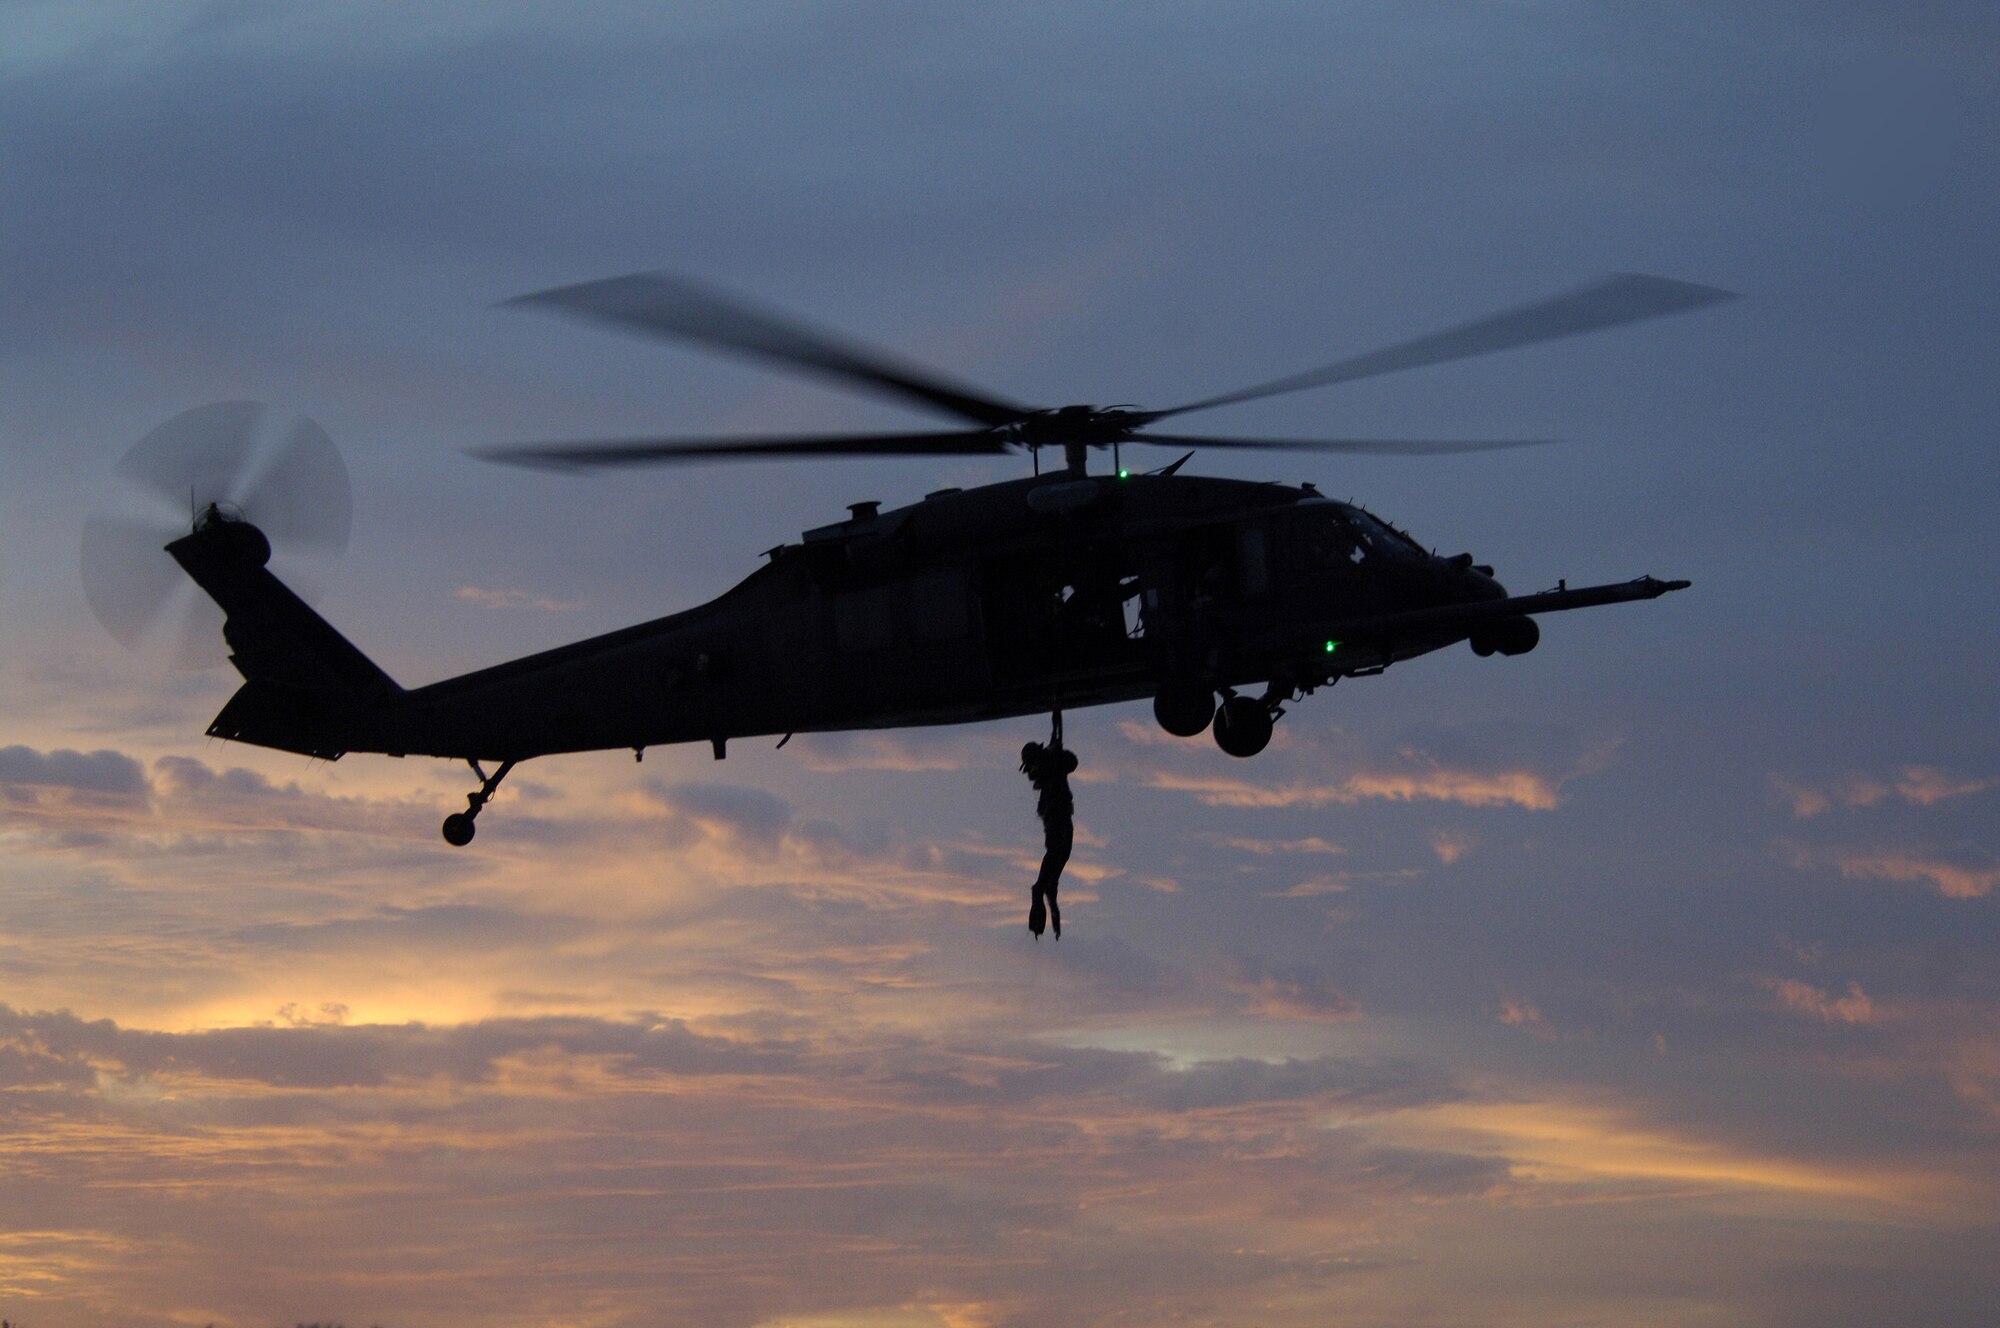 A 38th Rescue Squadron pararescueman rappels from an HH-60G Pave Hawk helicopter during a three-day training exercise at Key West Naval Air Station, Fla. All three Moody rescue squadrons tested new capabilities while participating in an interservice exercise with the U.S. Army. (U.S. Air Force photo by Senior Airman Javier Cruz)